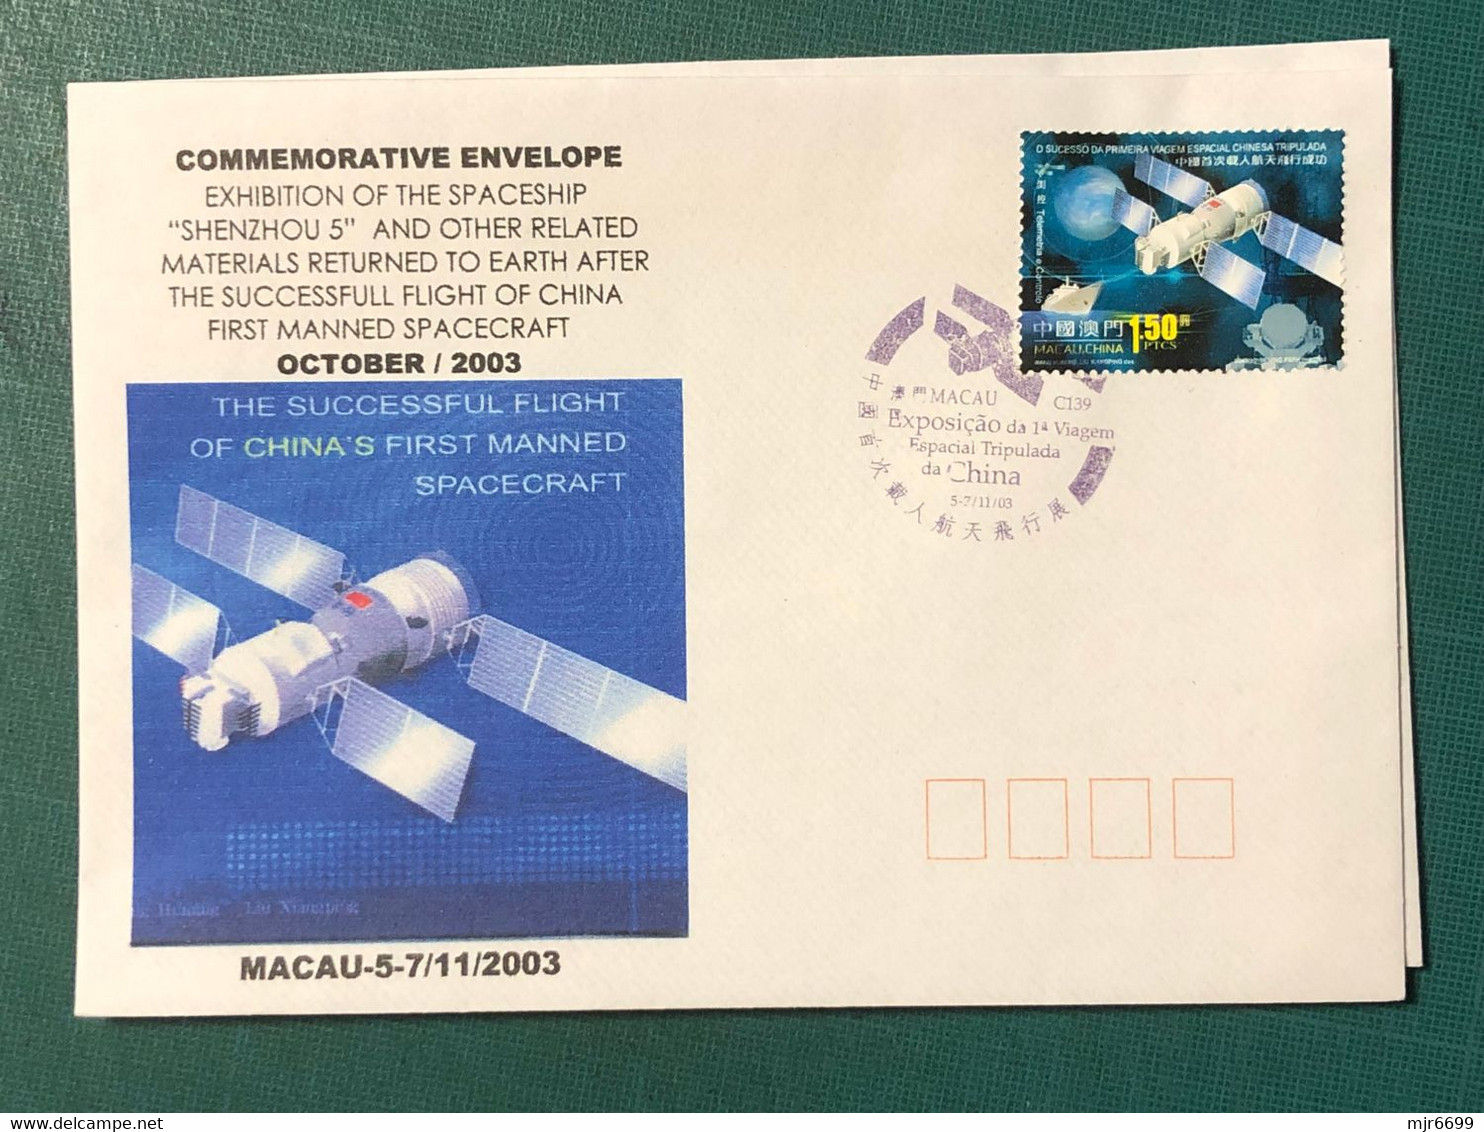 MACAU 2003 EXHIBITION OF THE SPACESHIP OF CHINA SPECIAL COVER #5 - FDC